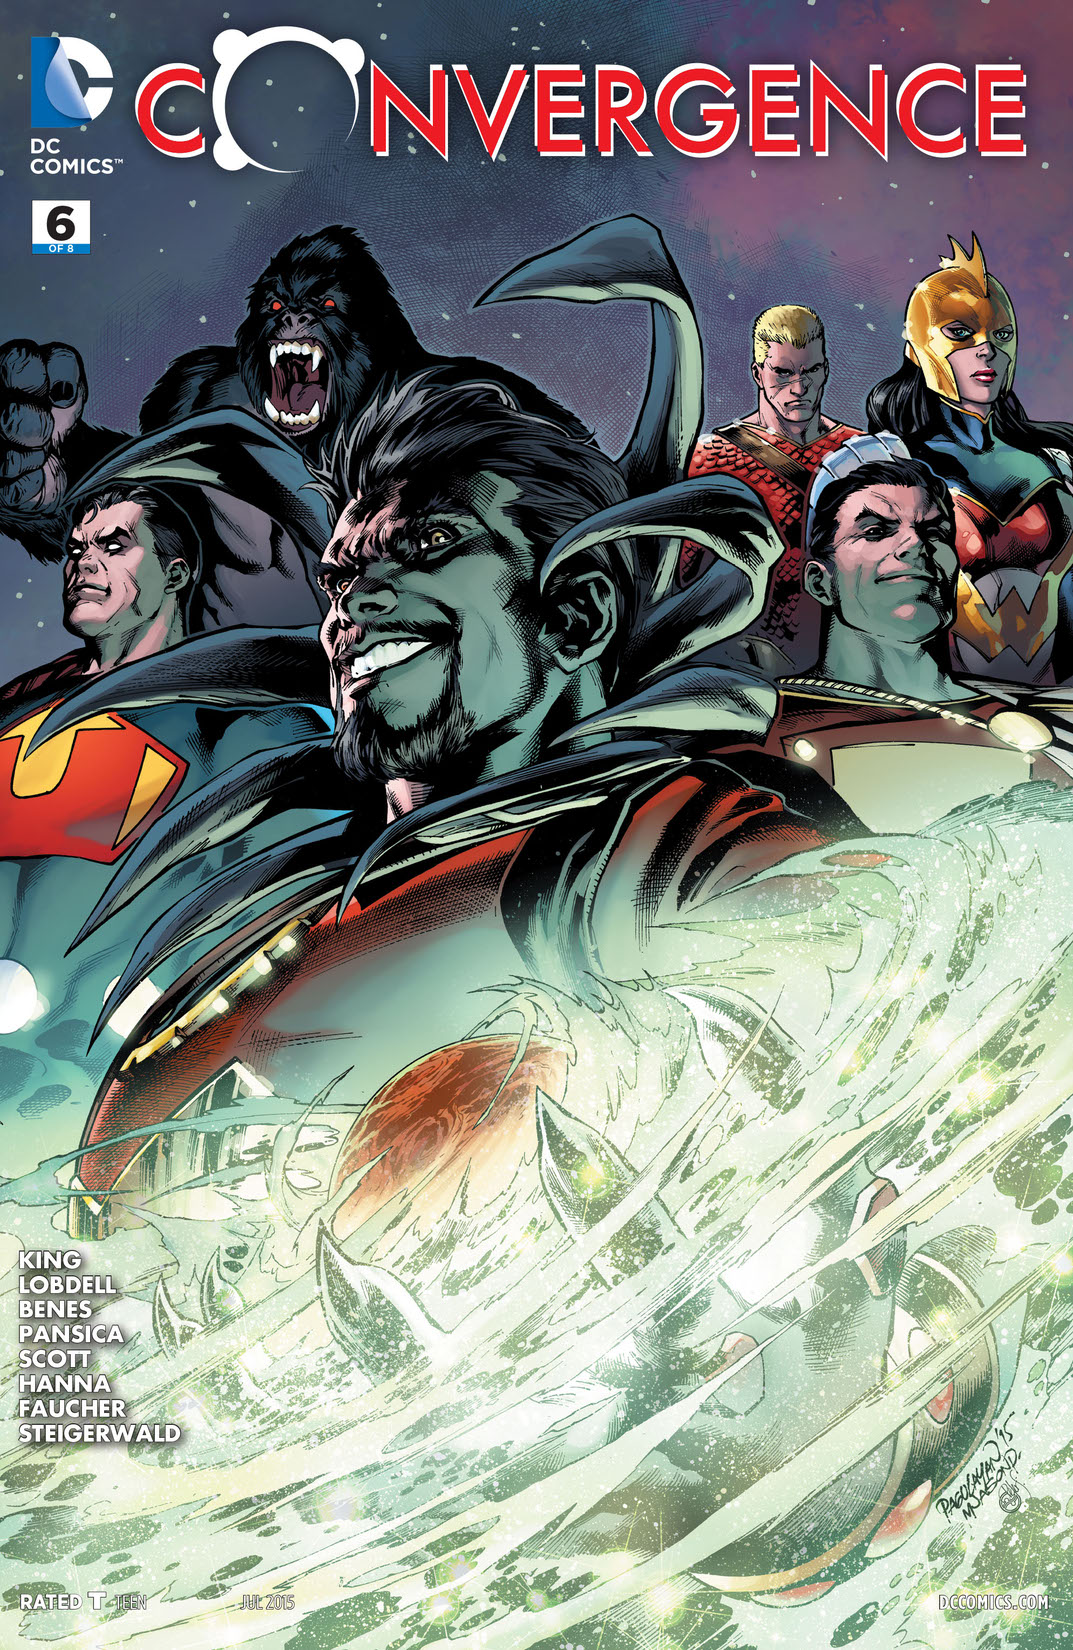 Convergence #6 preview images